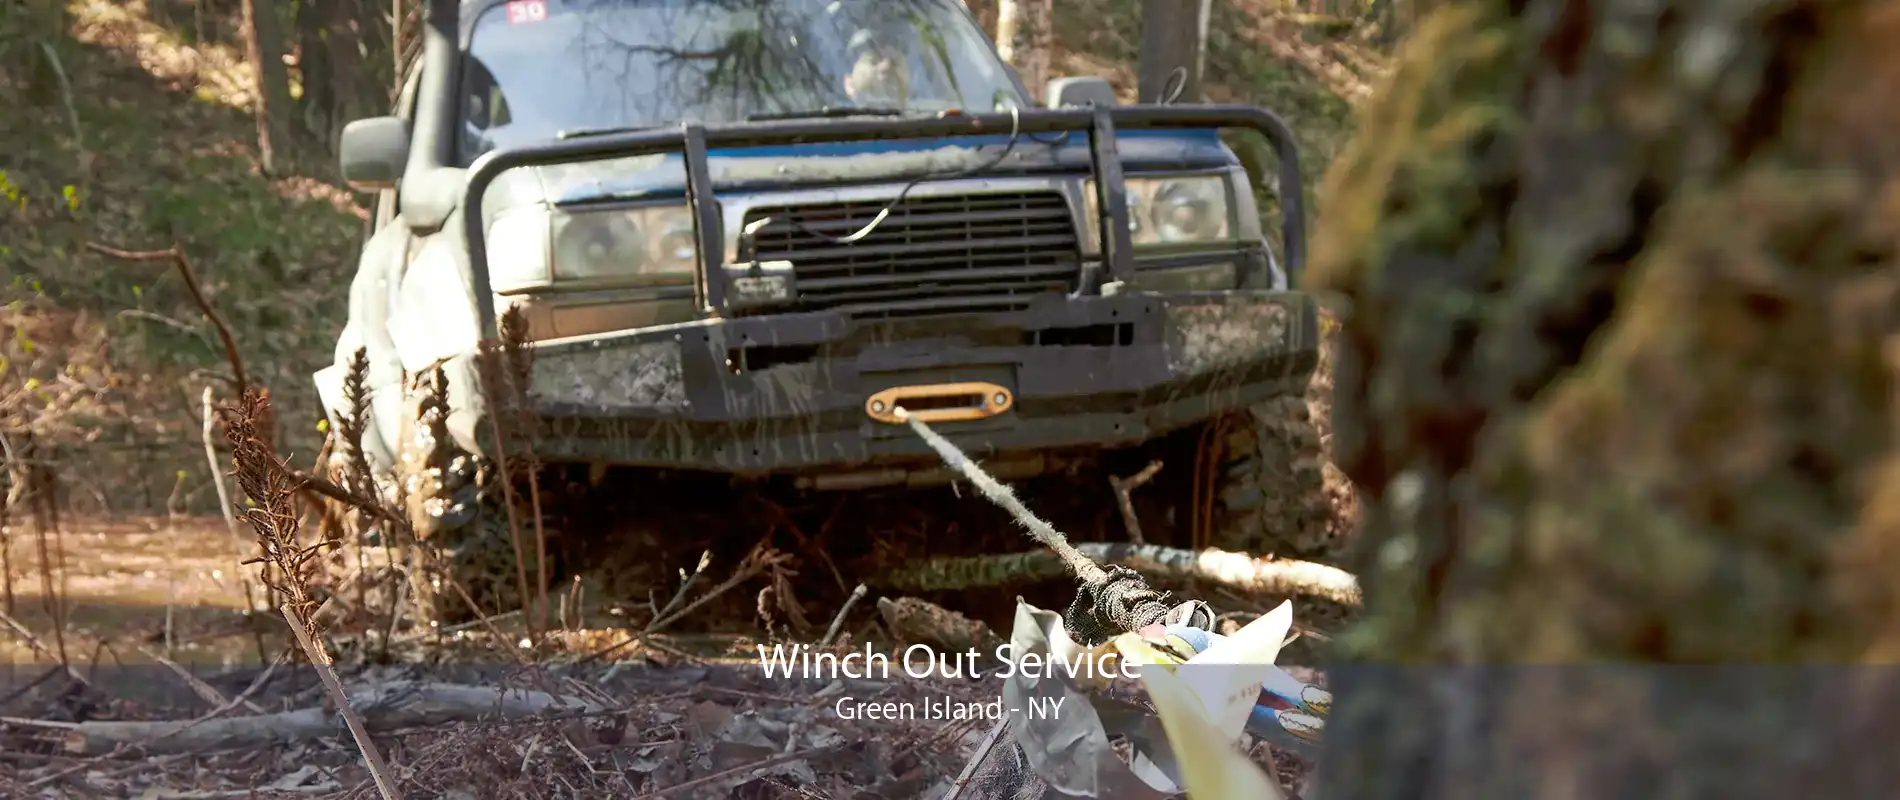 Winch Out Service Green Island - NY